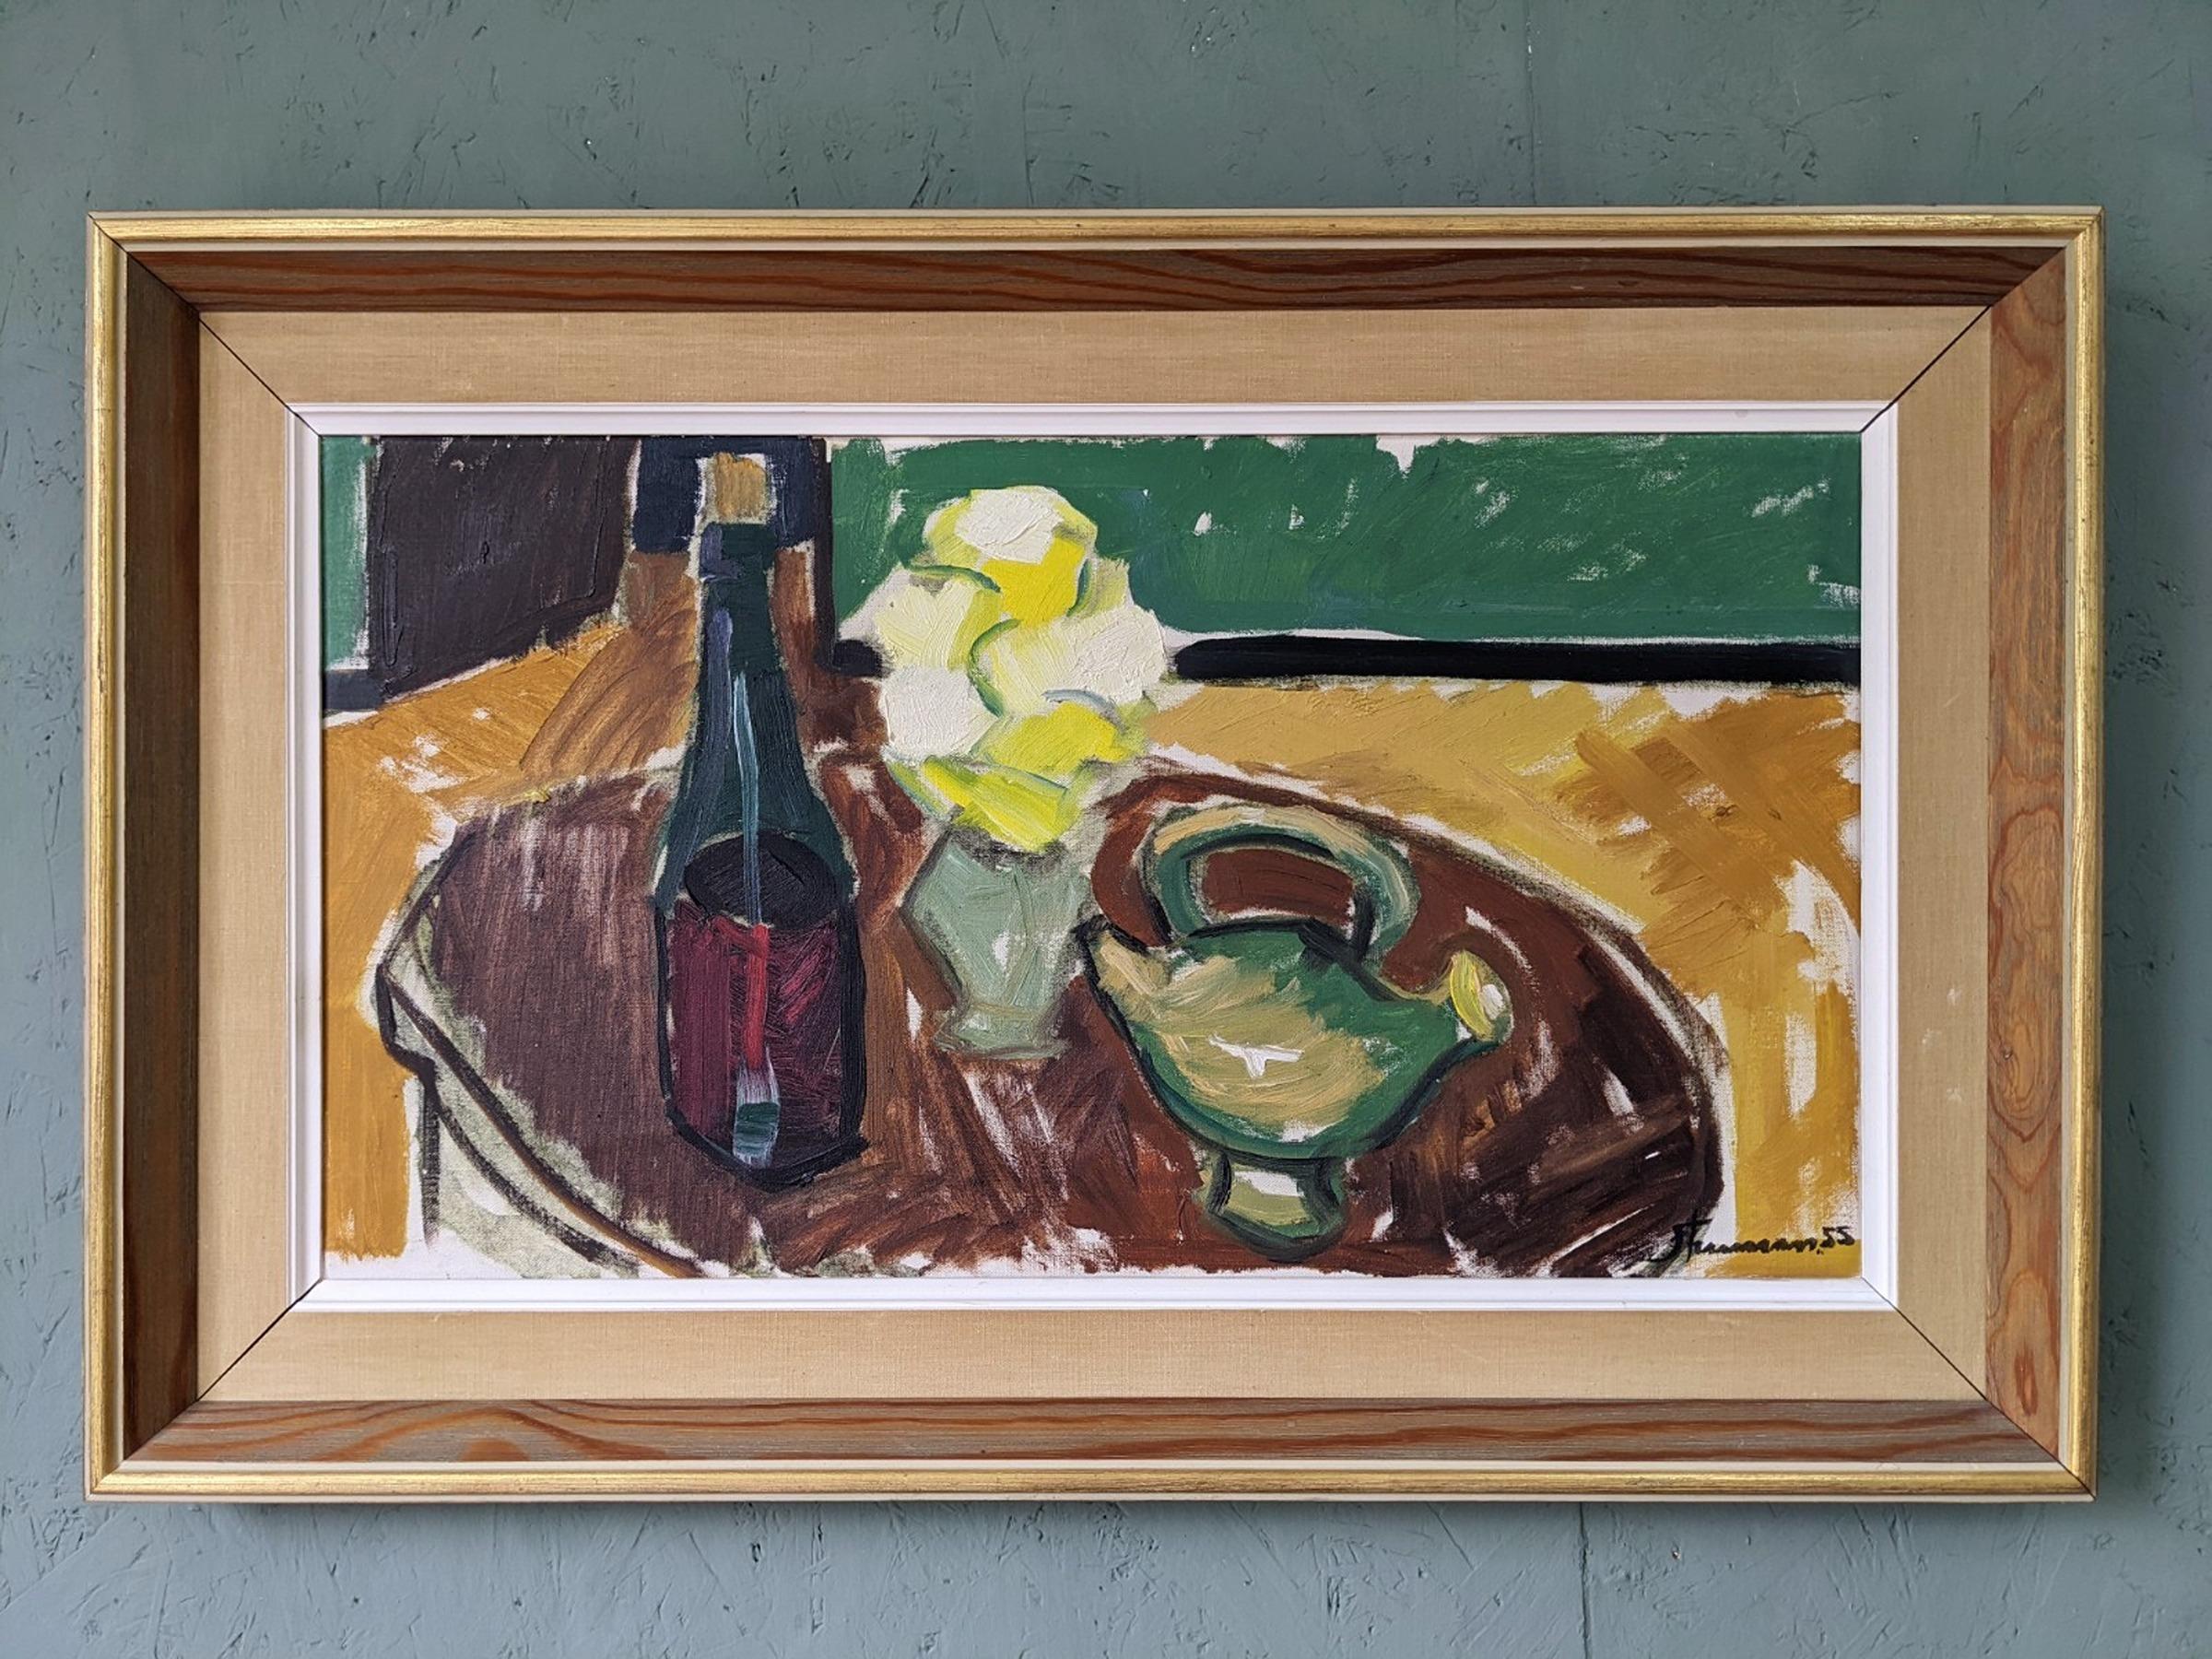 HOMELY REMINISCE
Size: 51 x 79 cm (including frame)
Oil on canvas

An expressive and brilliantly executed mid-century still life composition, executed in oil onto canvas and dated 1955.

The painting presents an interior scene that centers around a